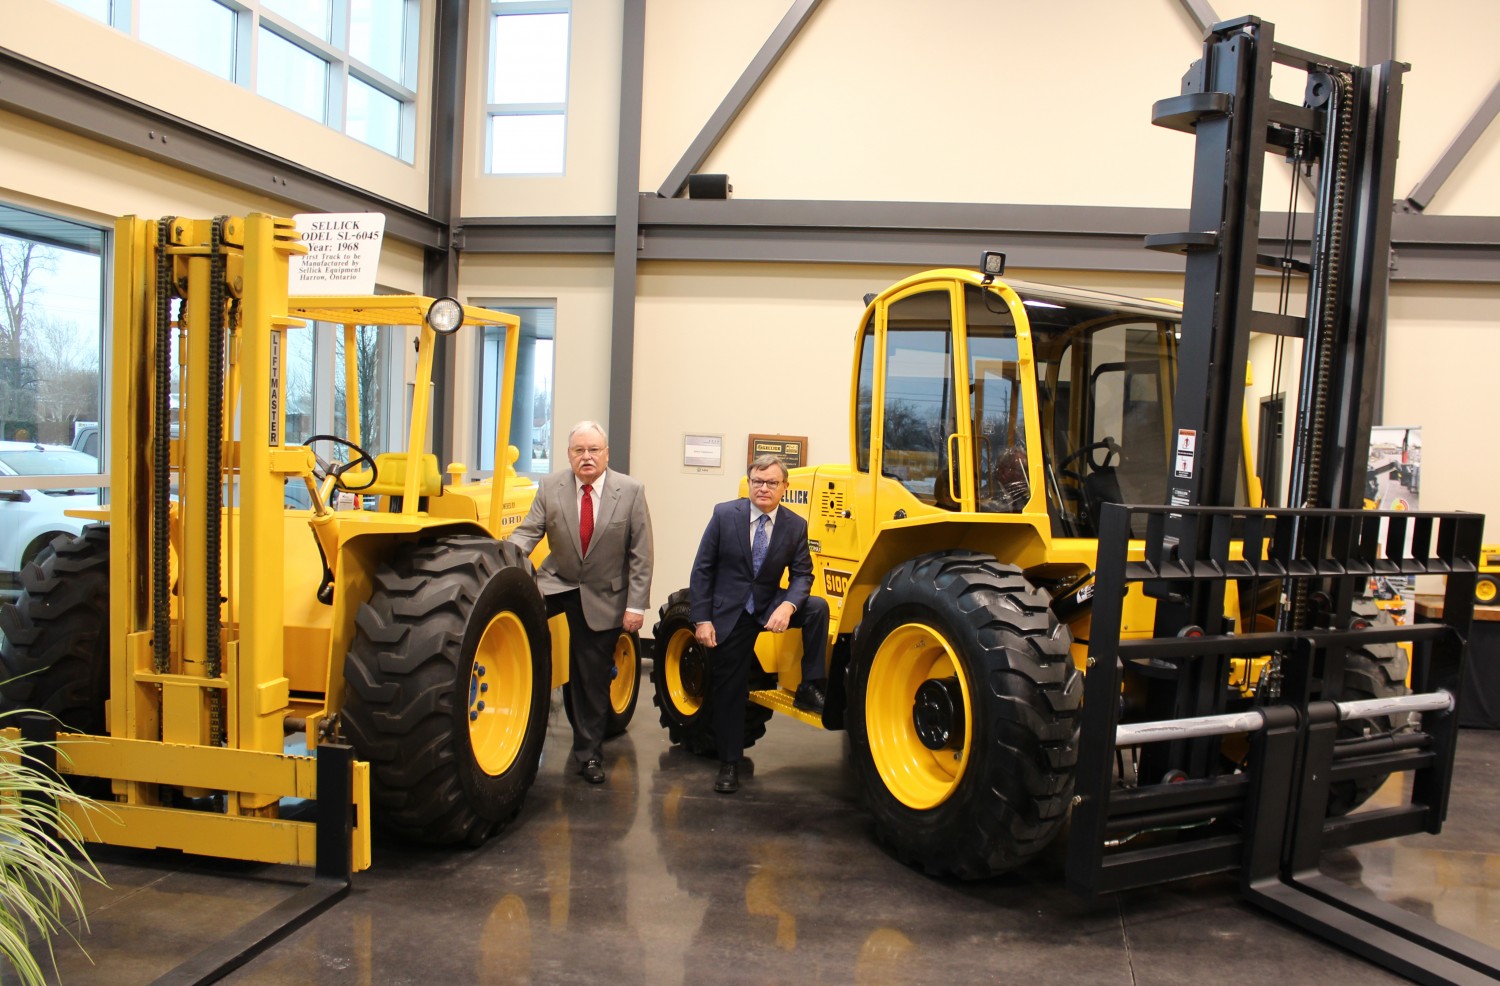 Howard (at left) and David Sellick with a couple of the company’s forklifts.